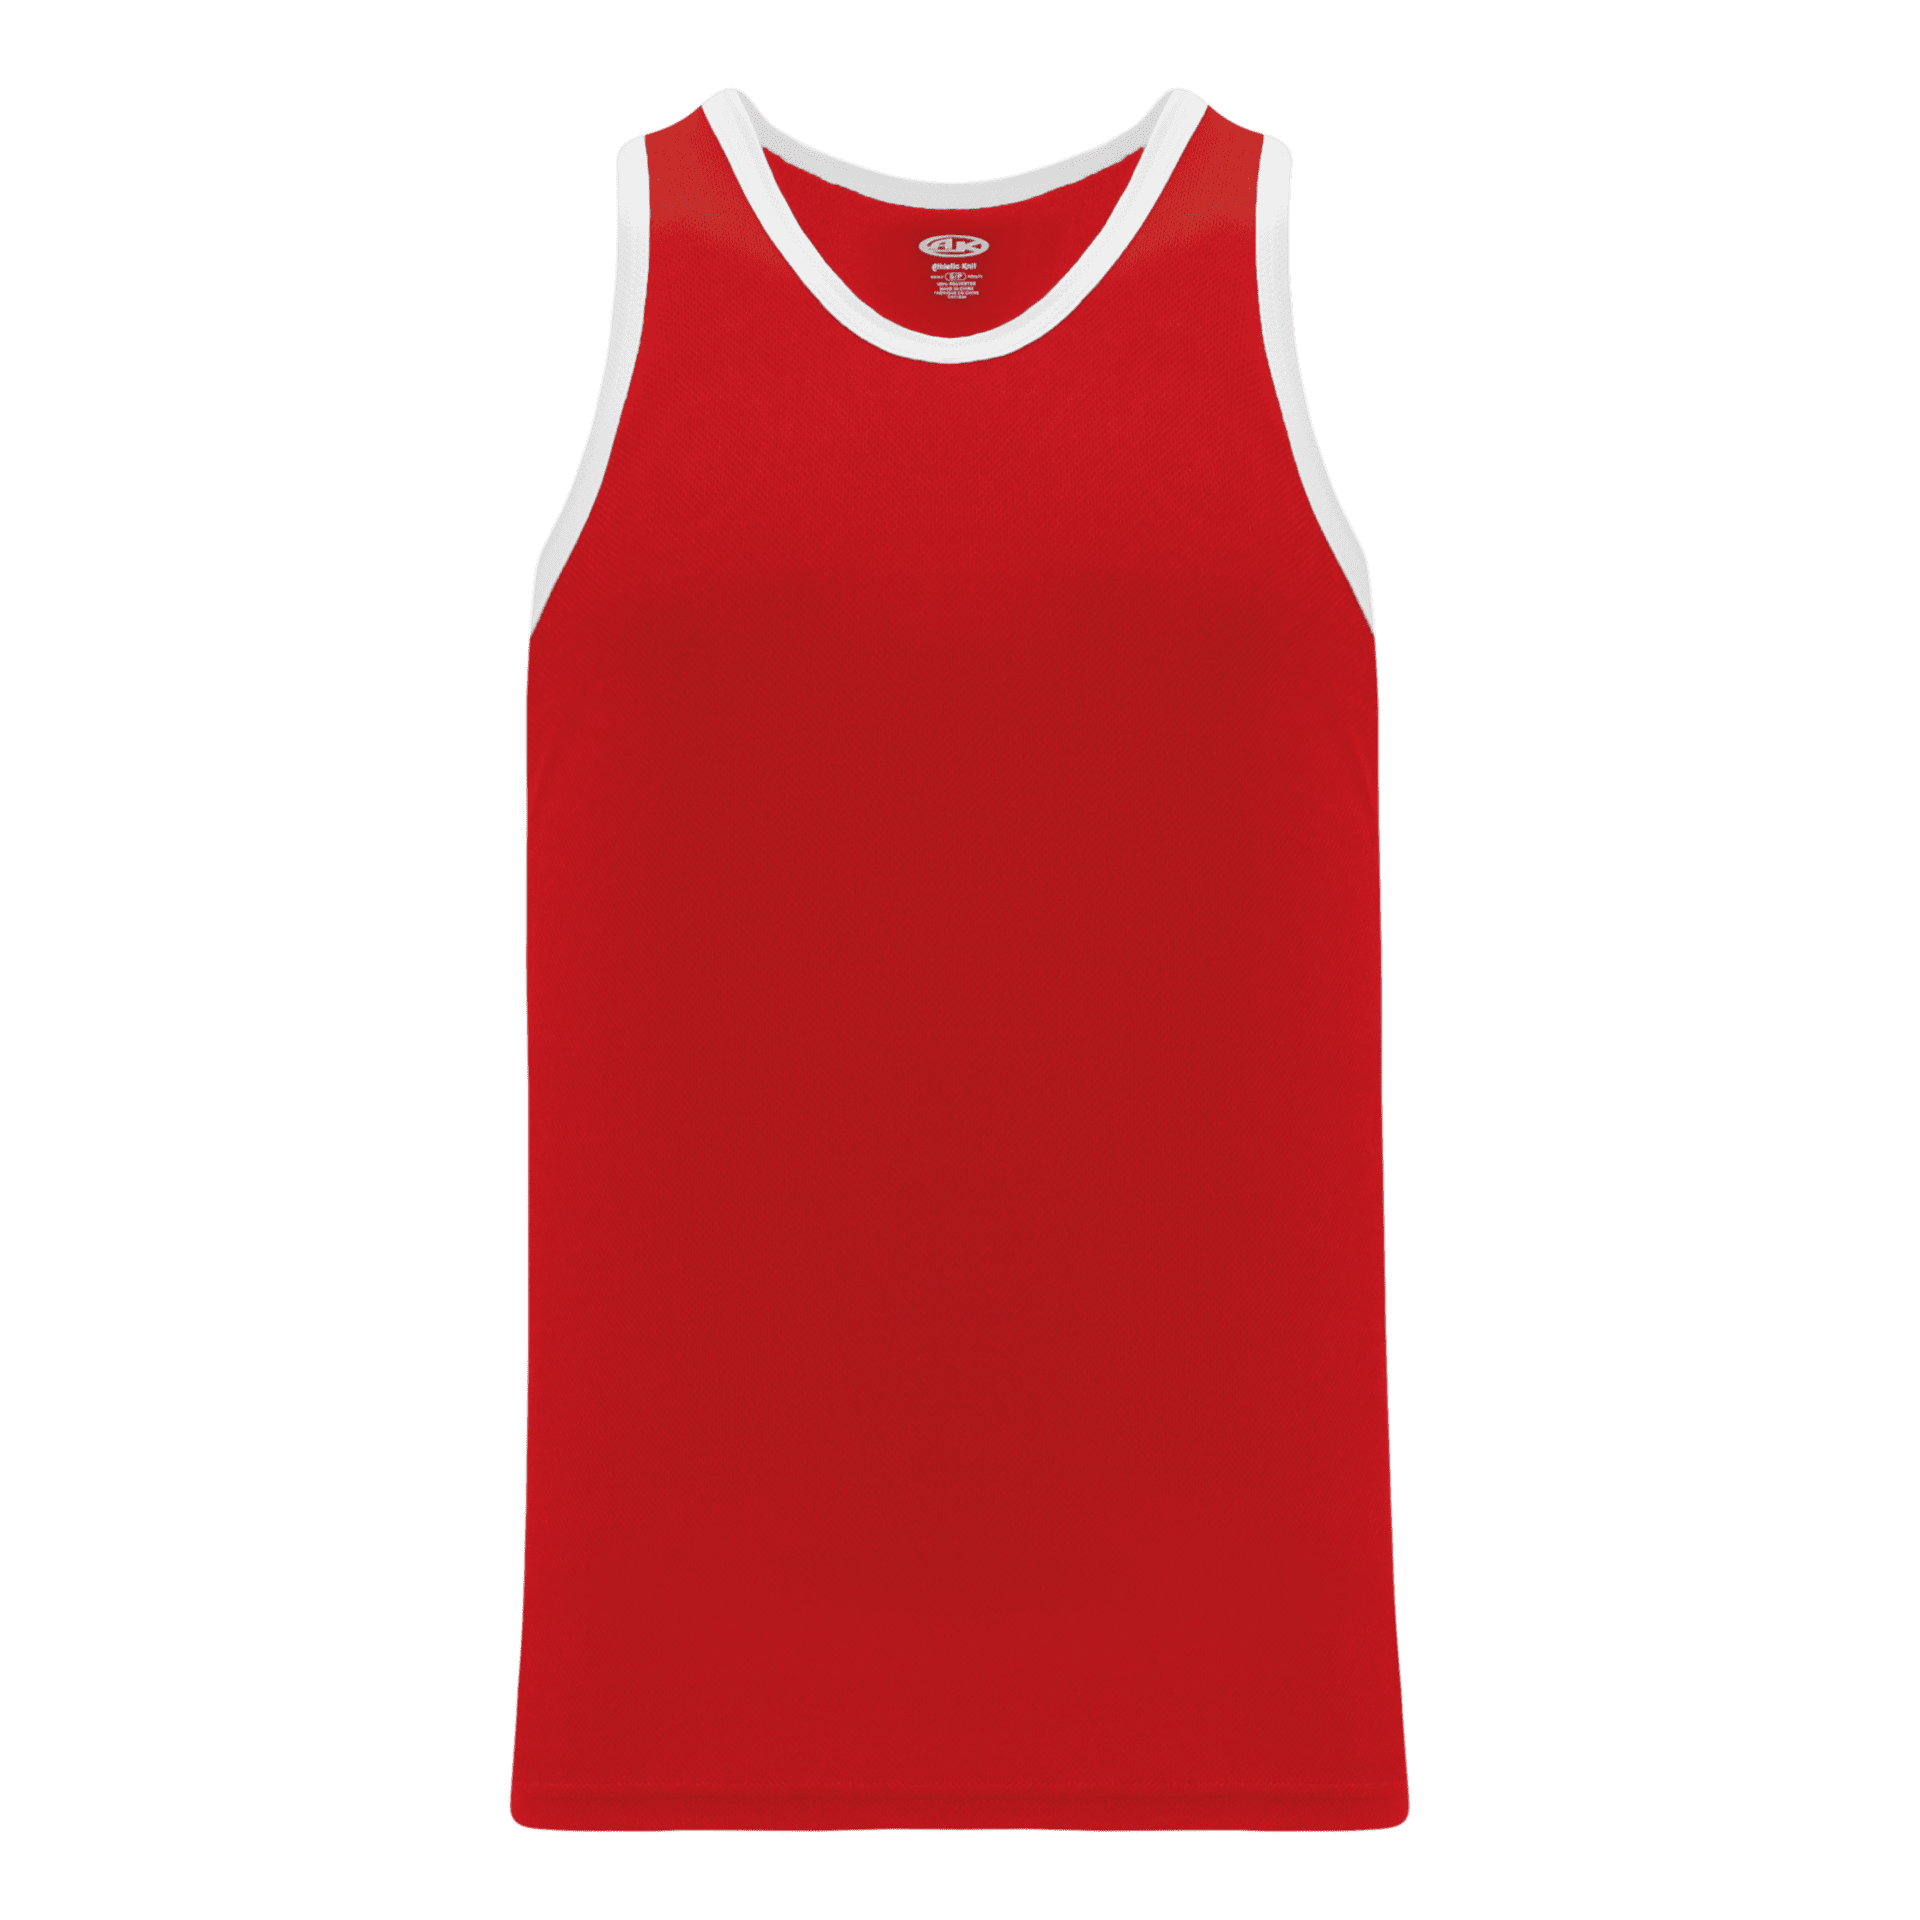 ATHLETIC KNIT LEAGUE BASKETBALL JERSEY #B1325 Kelly Red / White